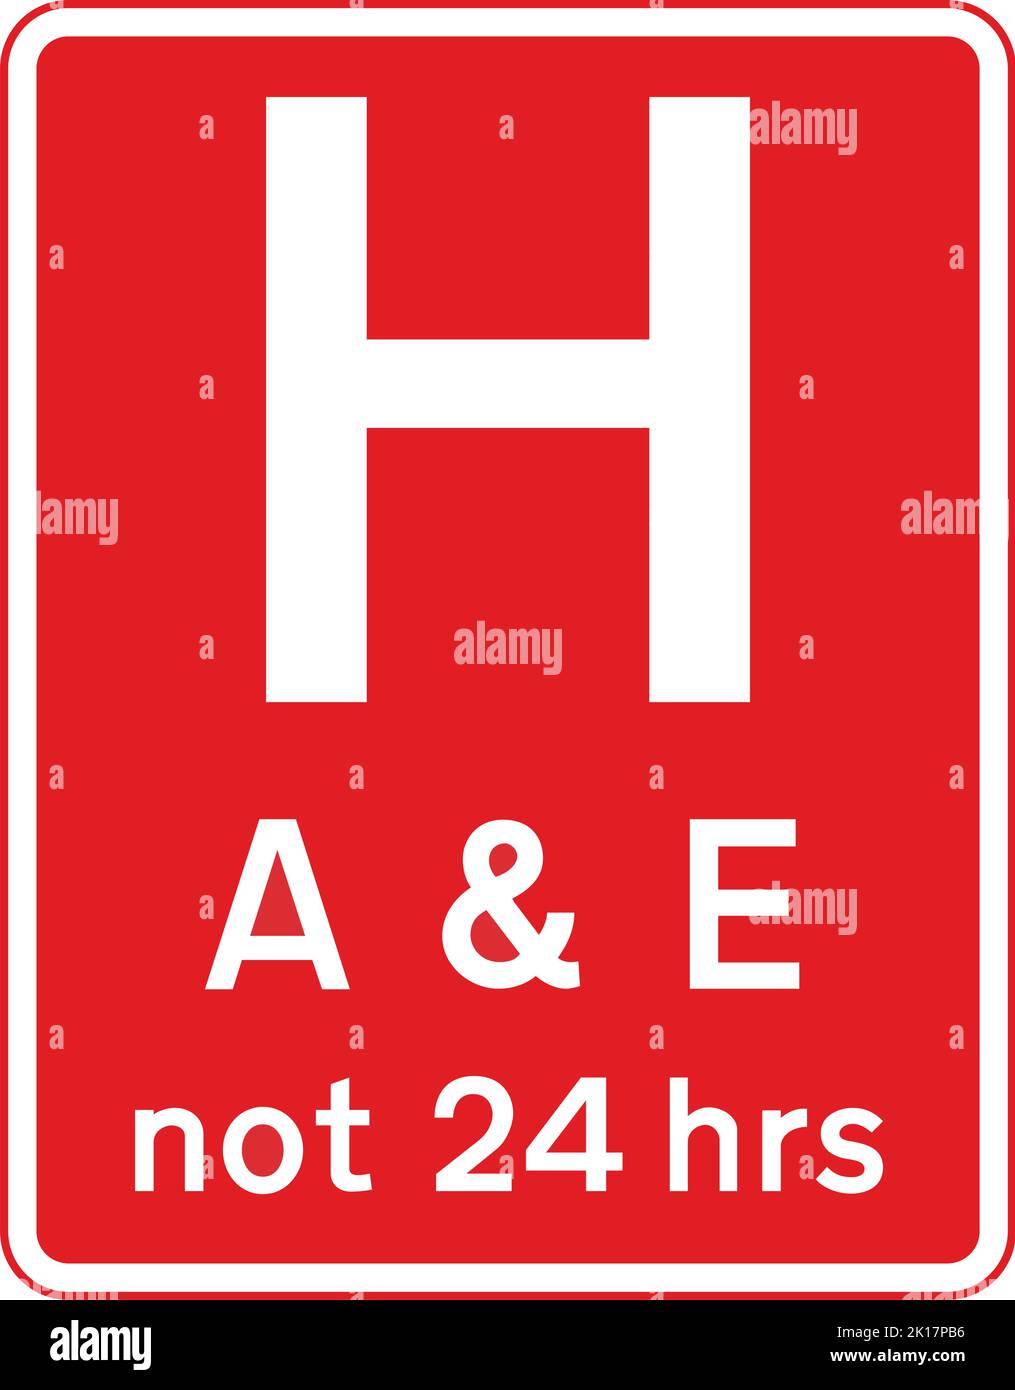 Hospital ahead with Accident and Emergency facilities, The Highway Code Traffic Sign, Signs giving orders, Signs with red circles are mostly prohibiti Stock Vector